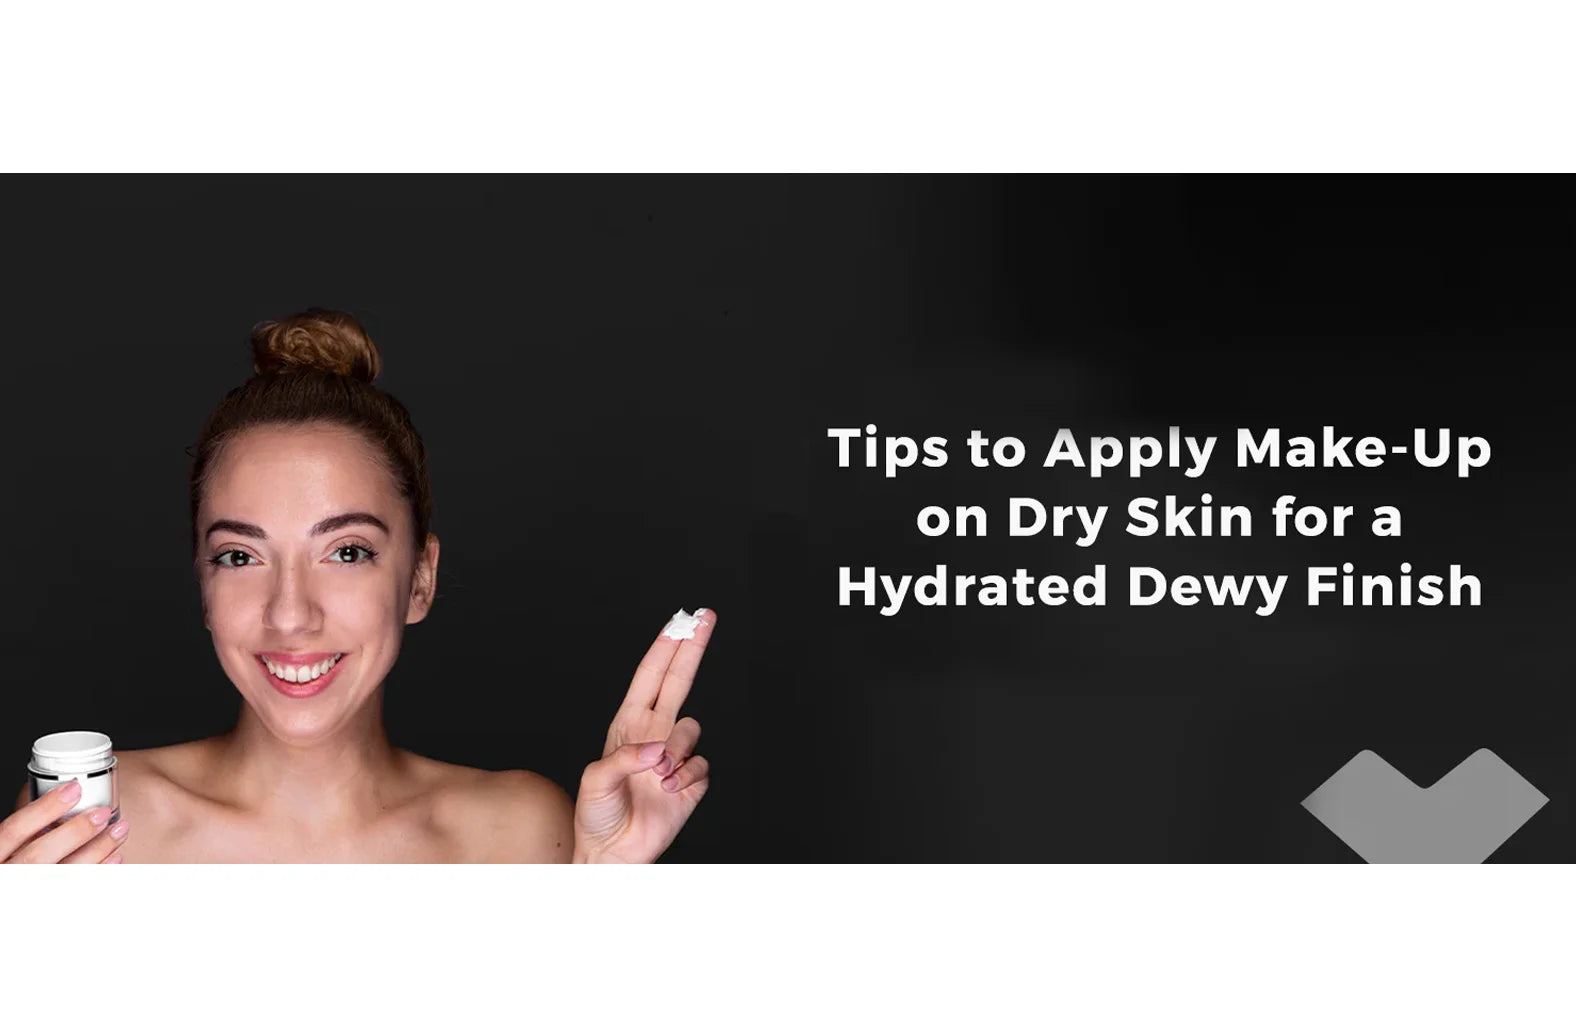 Tips-to-apply-make-up-on-dry-skin-for-a-hydrated-dewy-finish